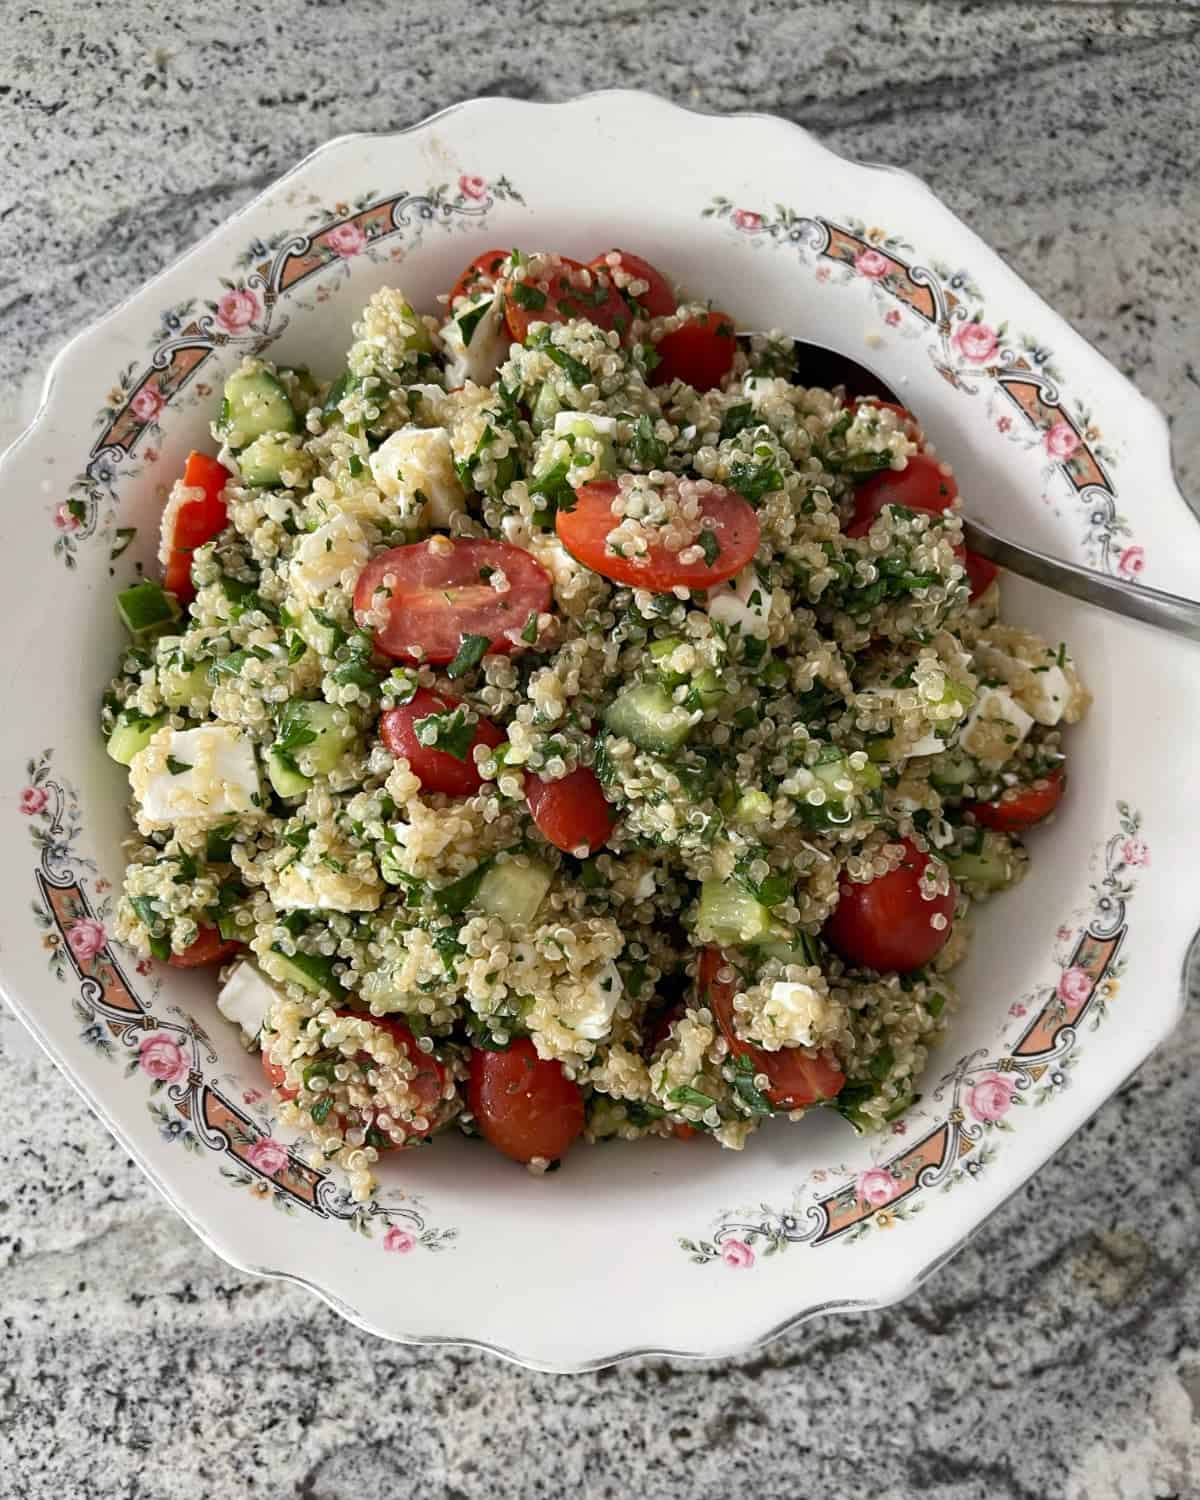 Quinoa tabbouleh salad with feta in white bowl.